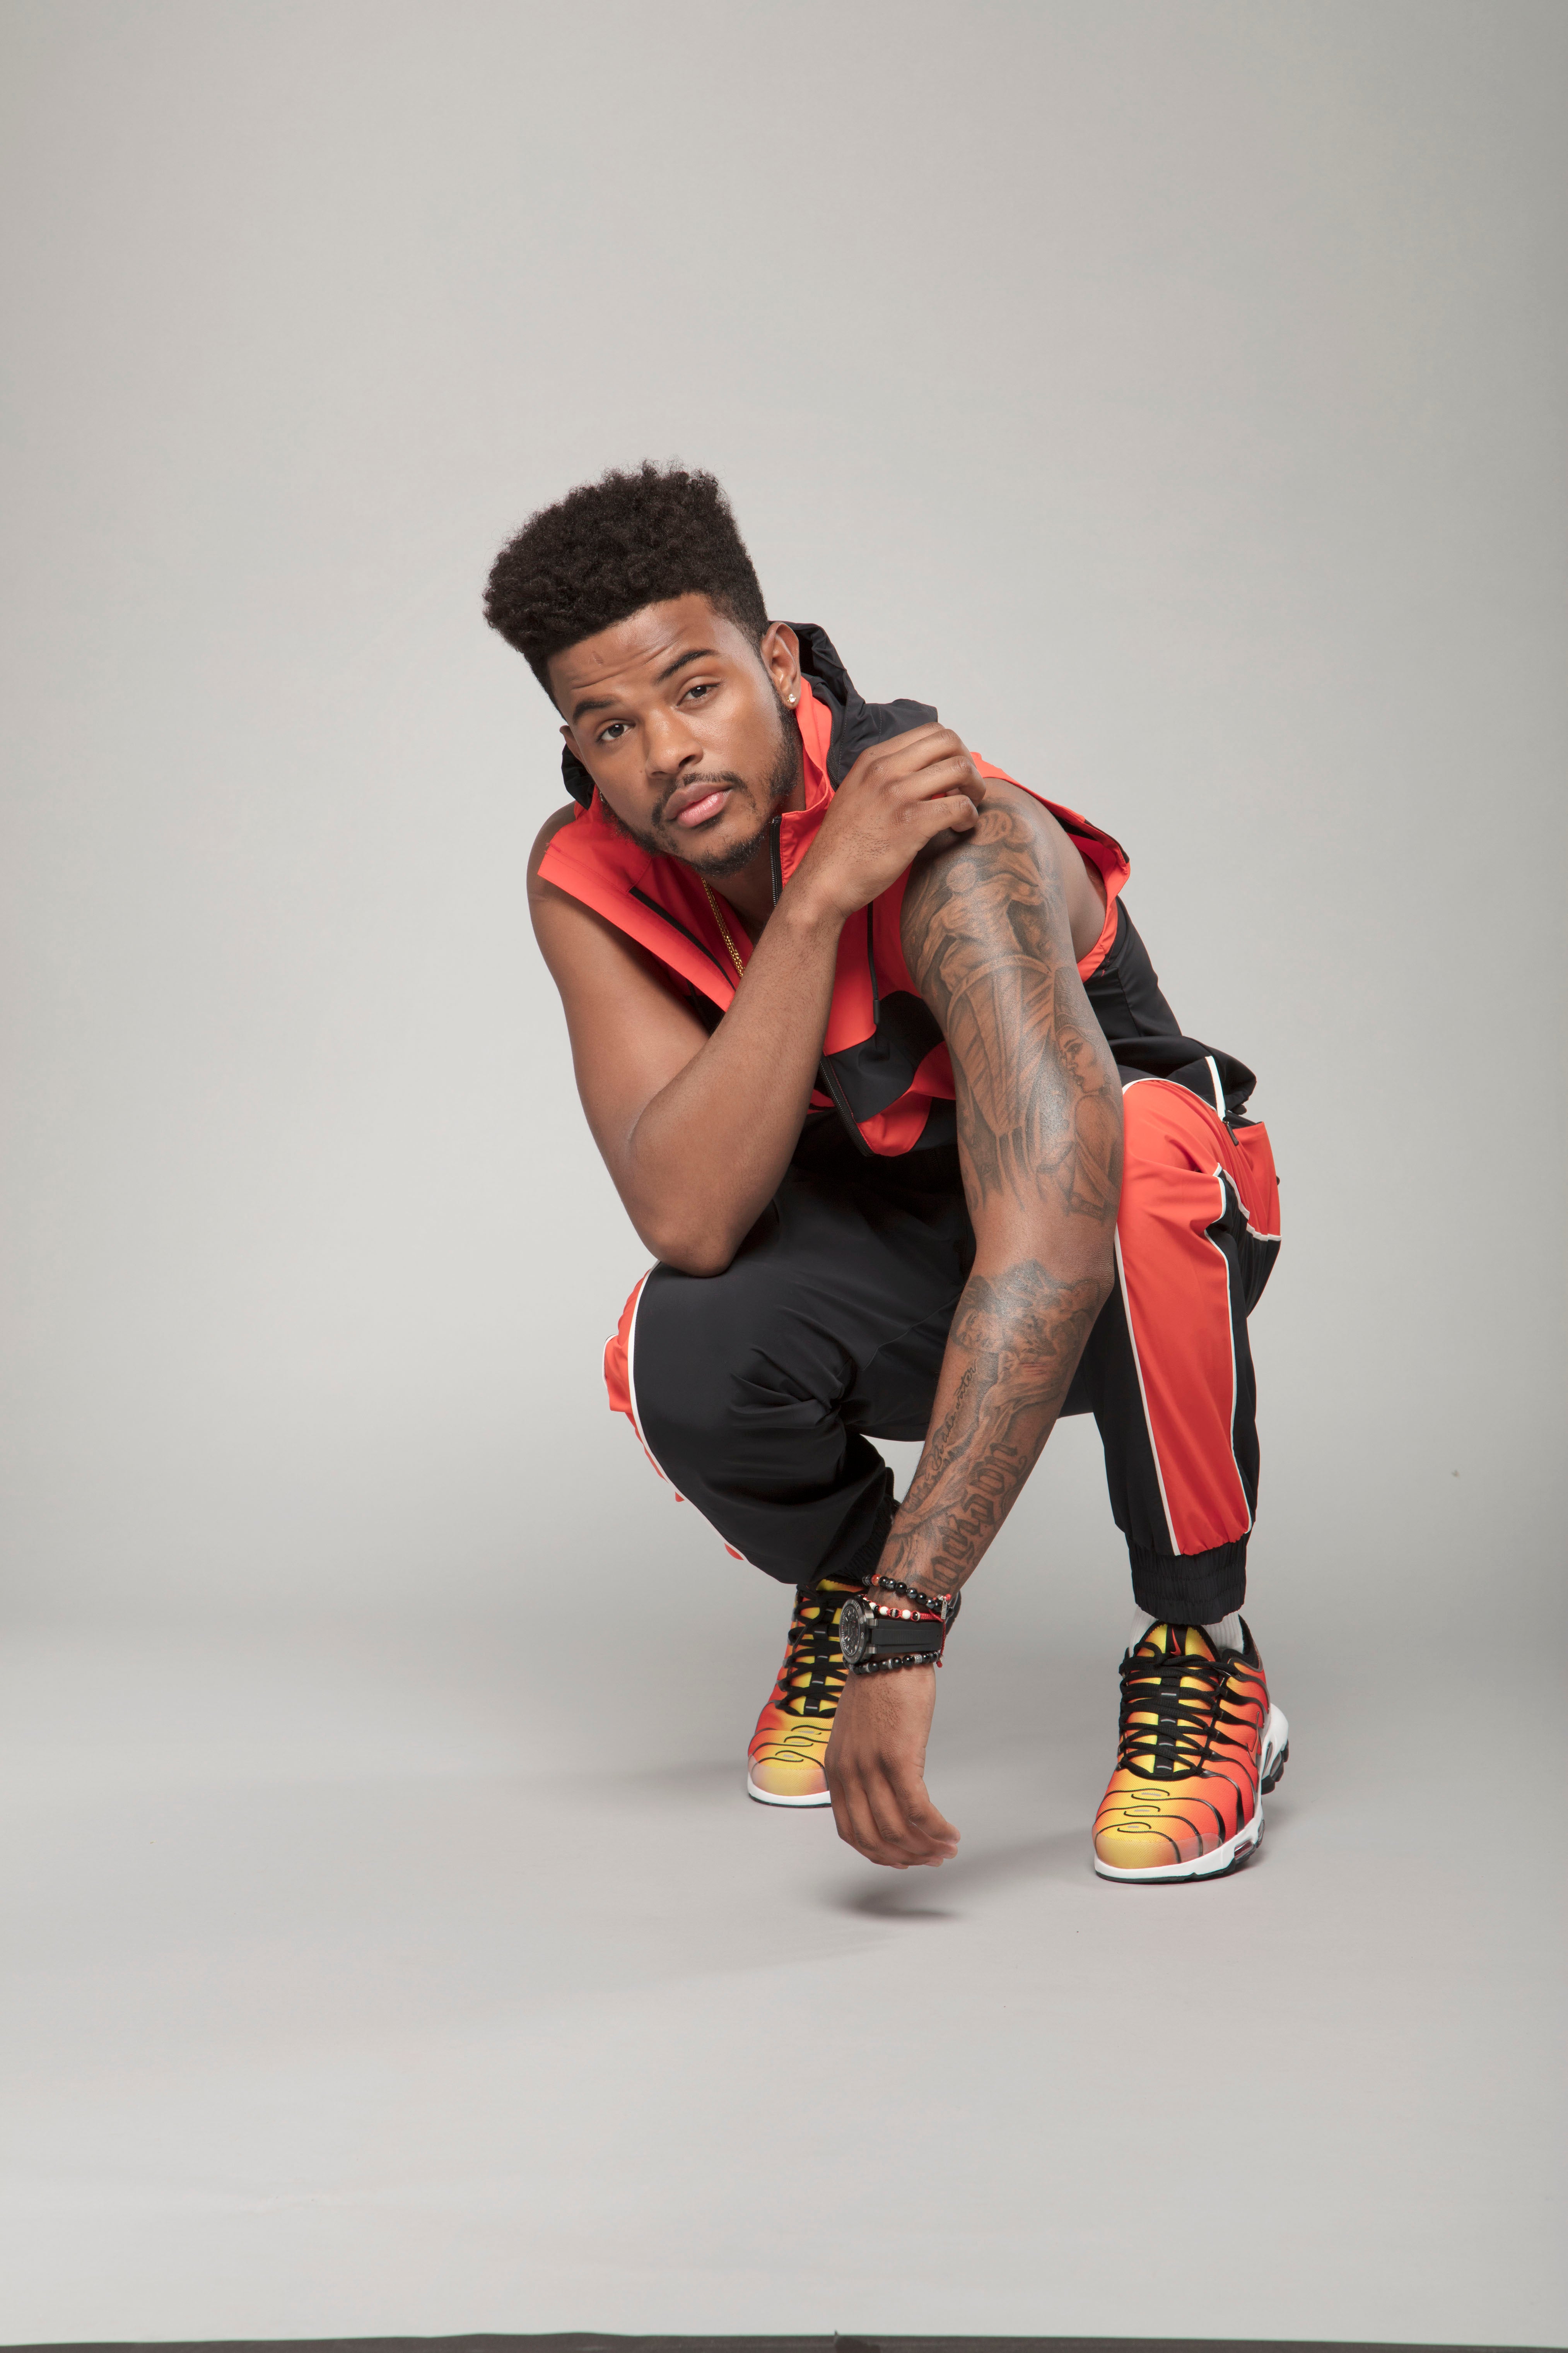 Style Your Guy: Trevor Jackson Schools Us On Life And How To Rock Modern Sportswear
